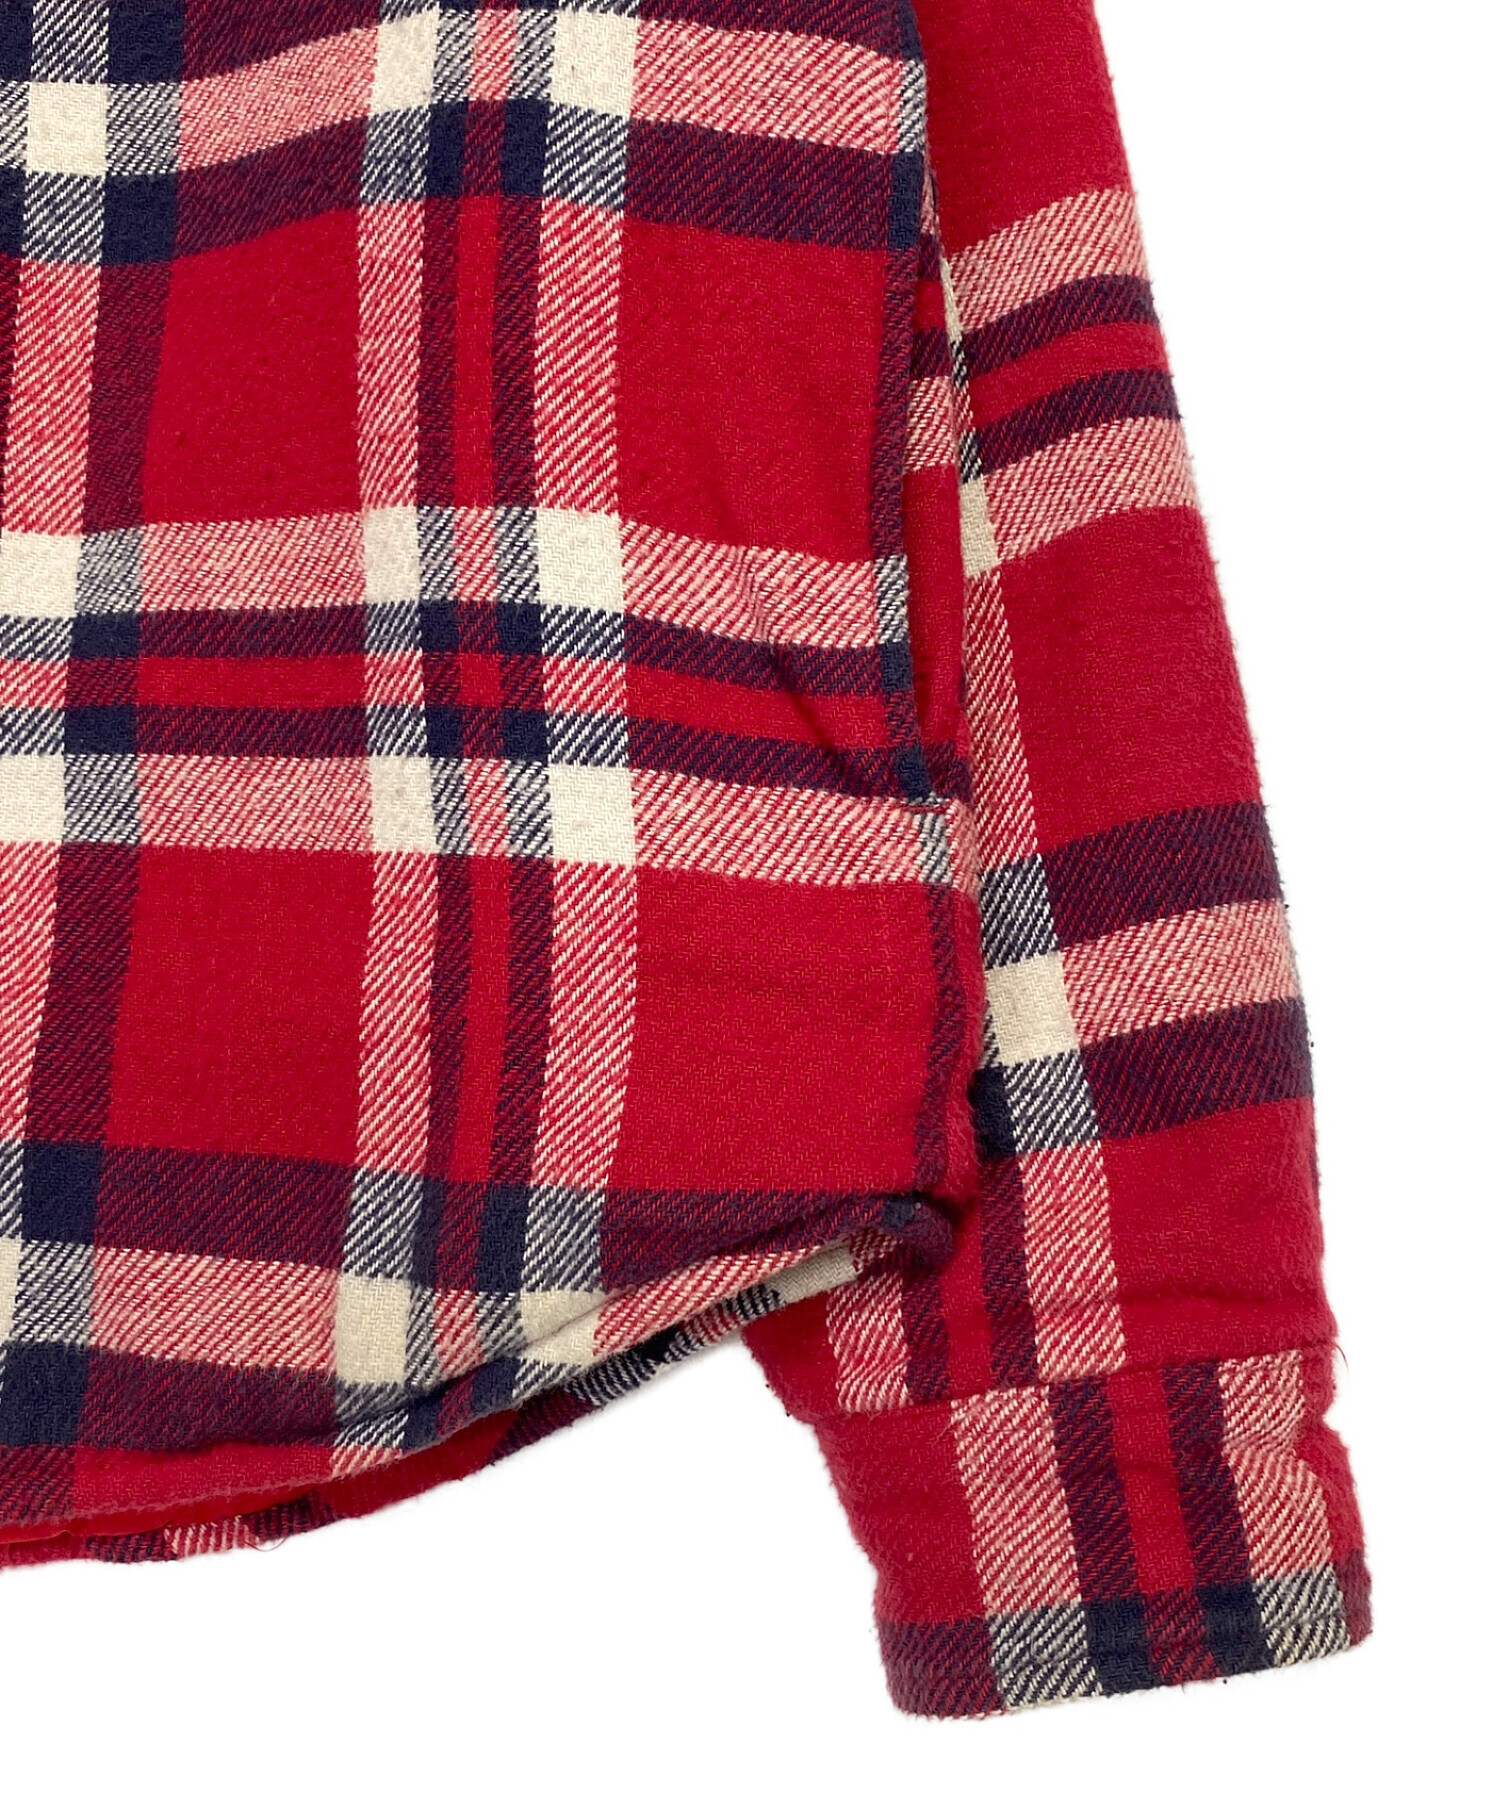 Mサイズ Supreme Quilted Flannel Shirt レッド